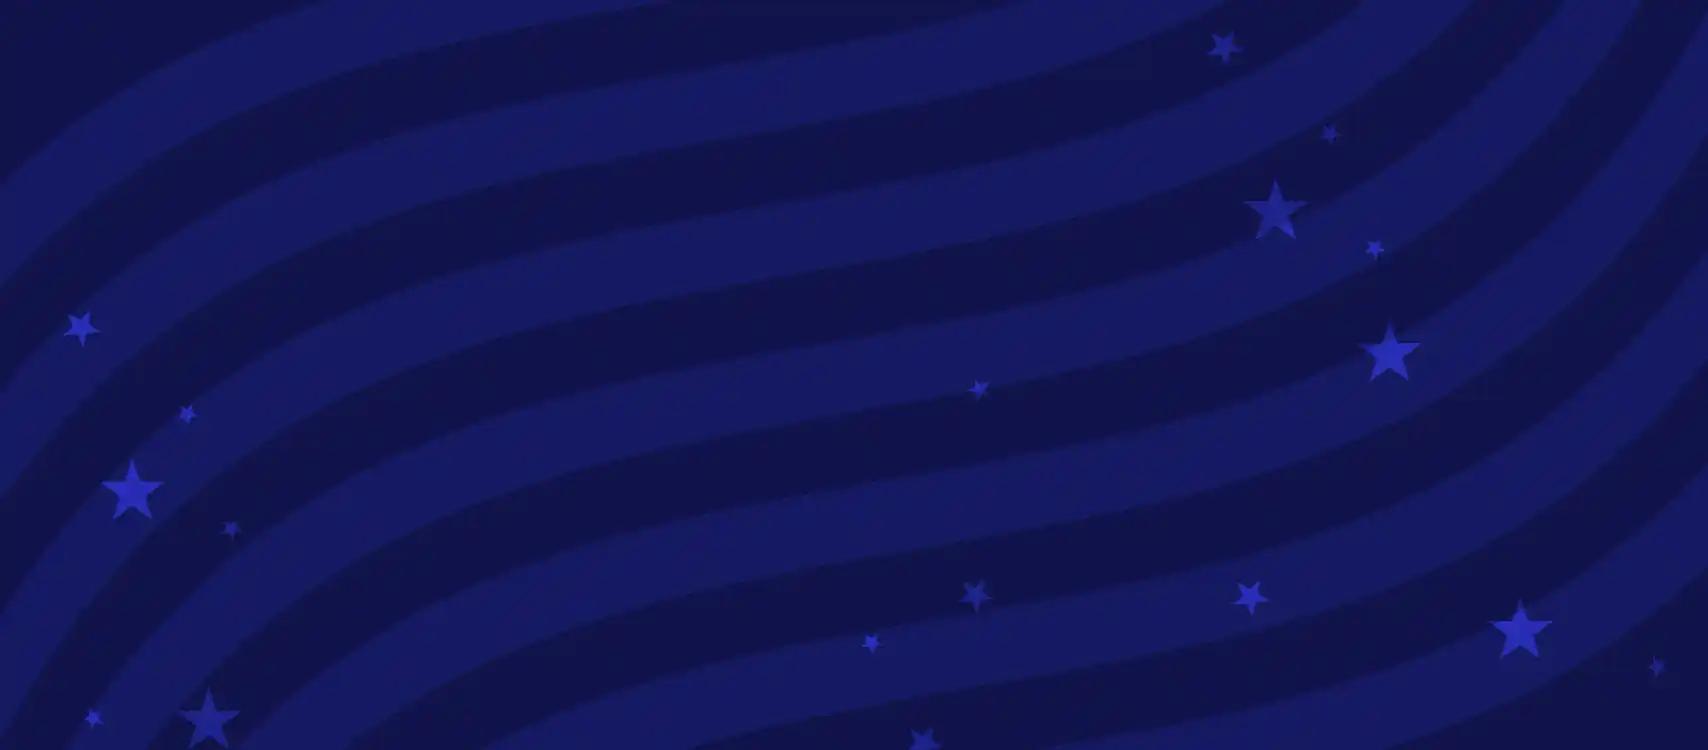 Blue background with transparent white stripes and stars